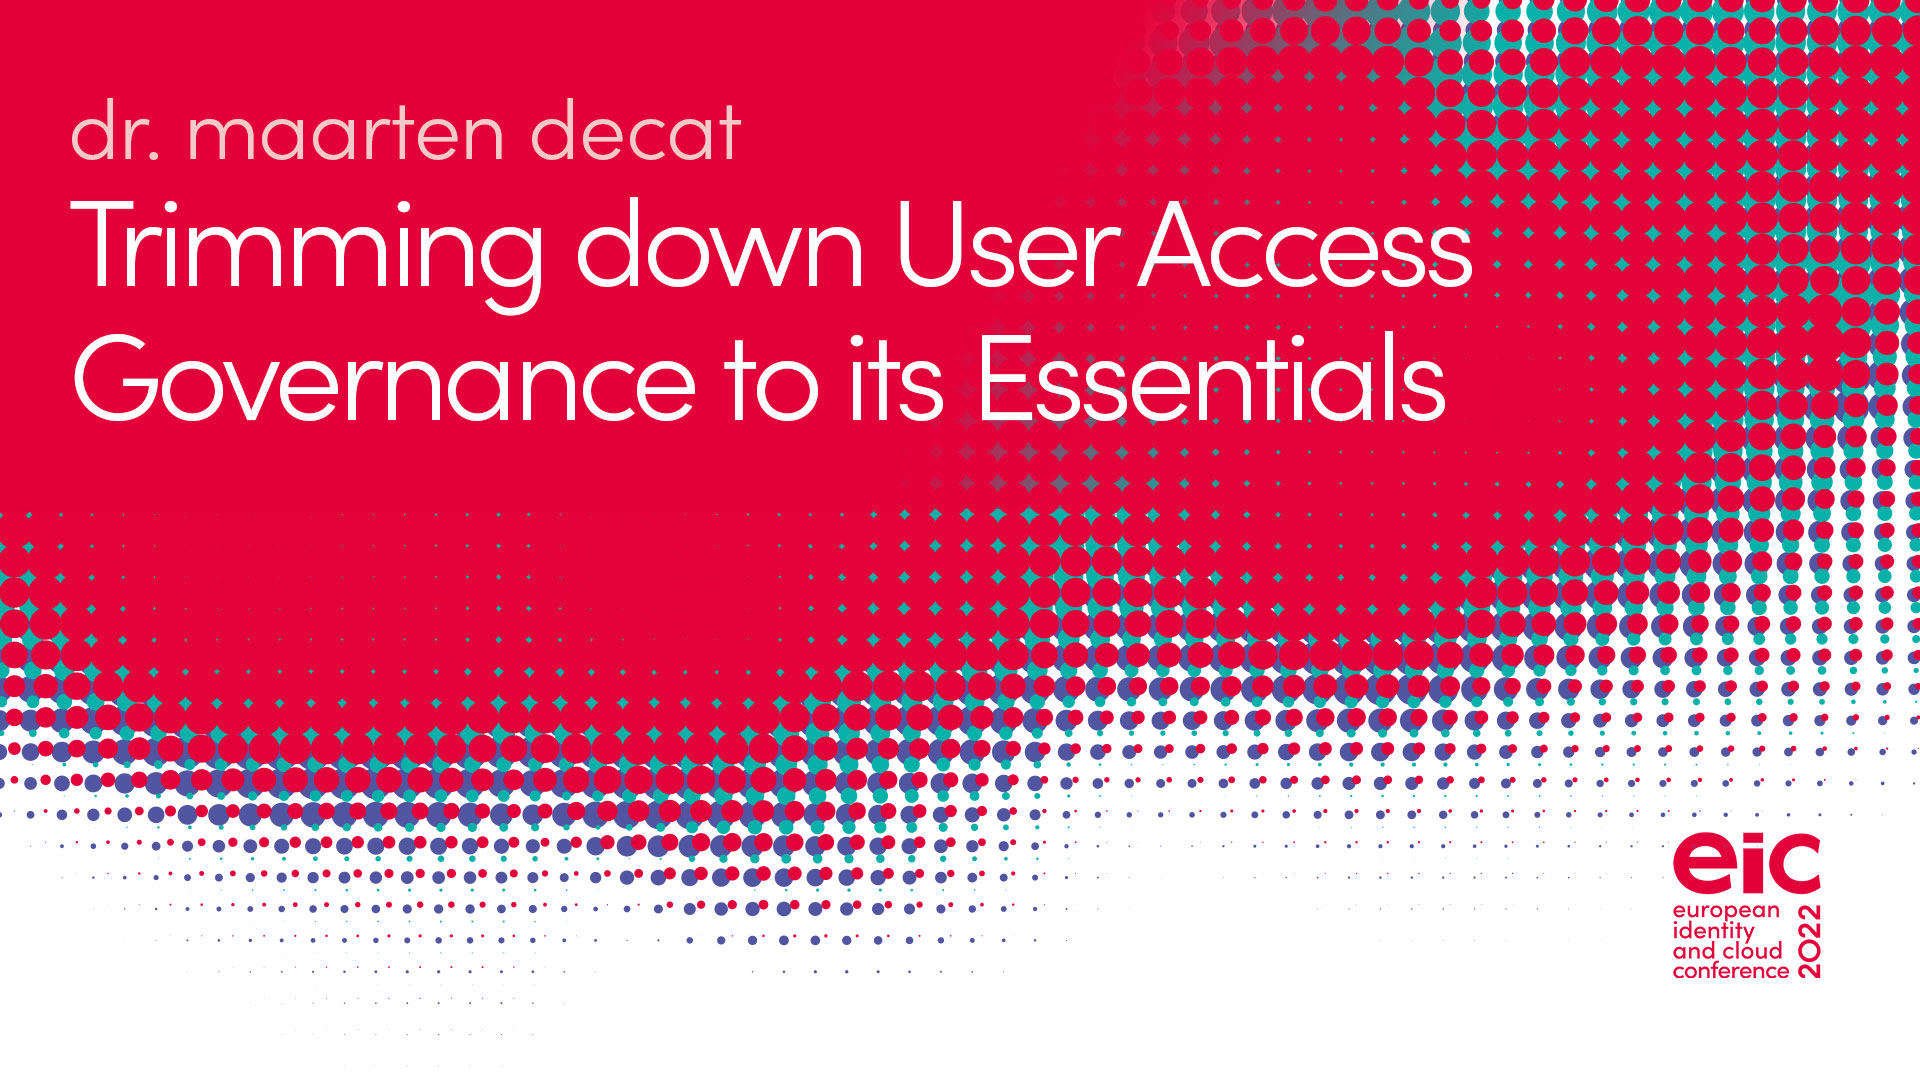 Trimming down User Access Governance to its Essentials